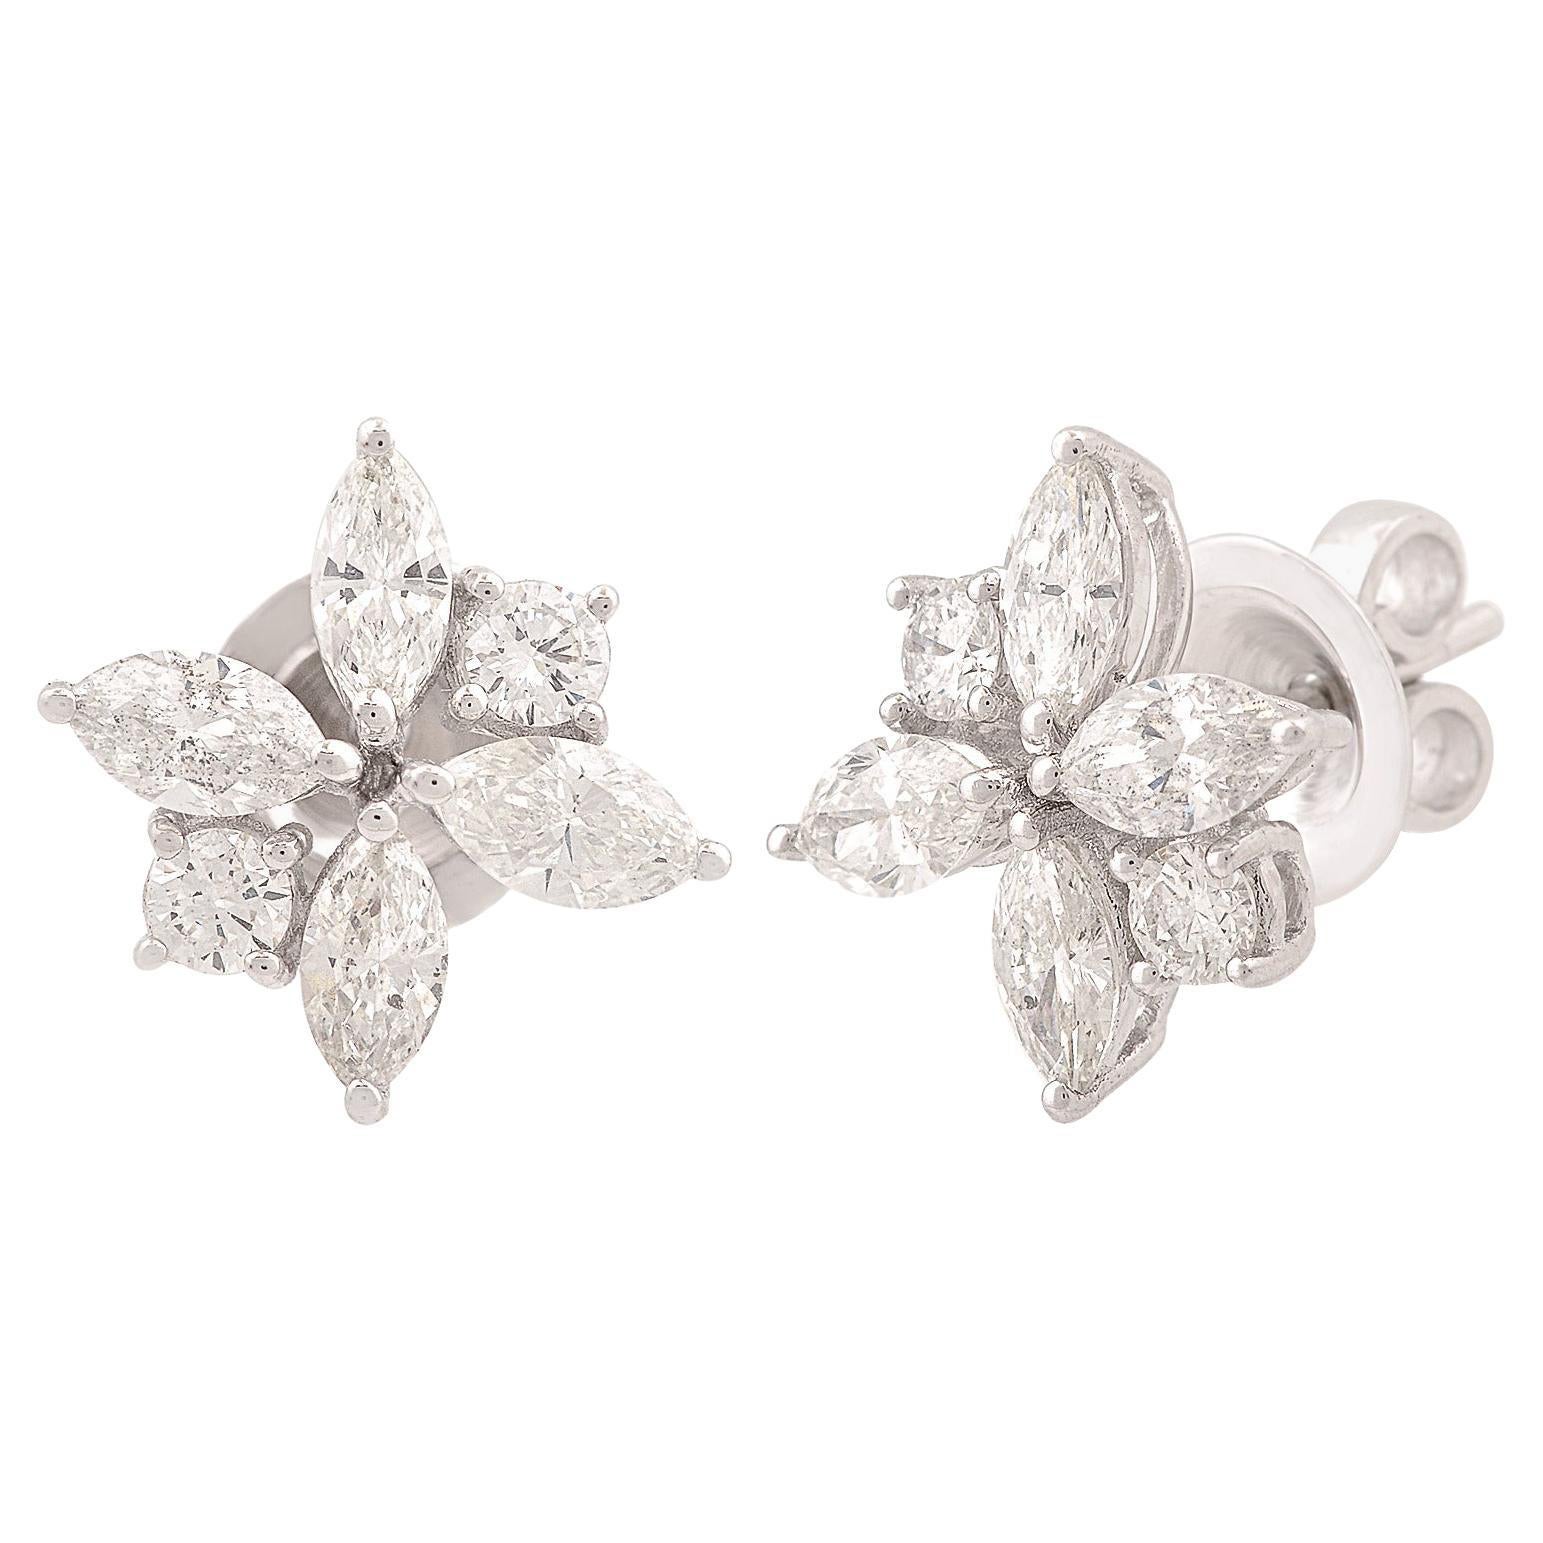 1.57 Carat Marquise & Round Diamond Stud Earrings 14 Karat White Gold Jewelry For Sale